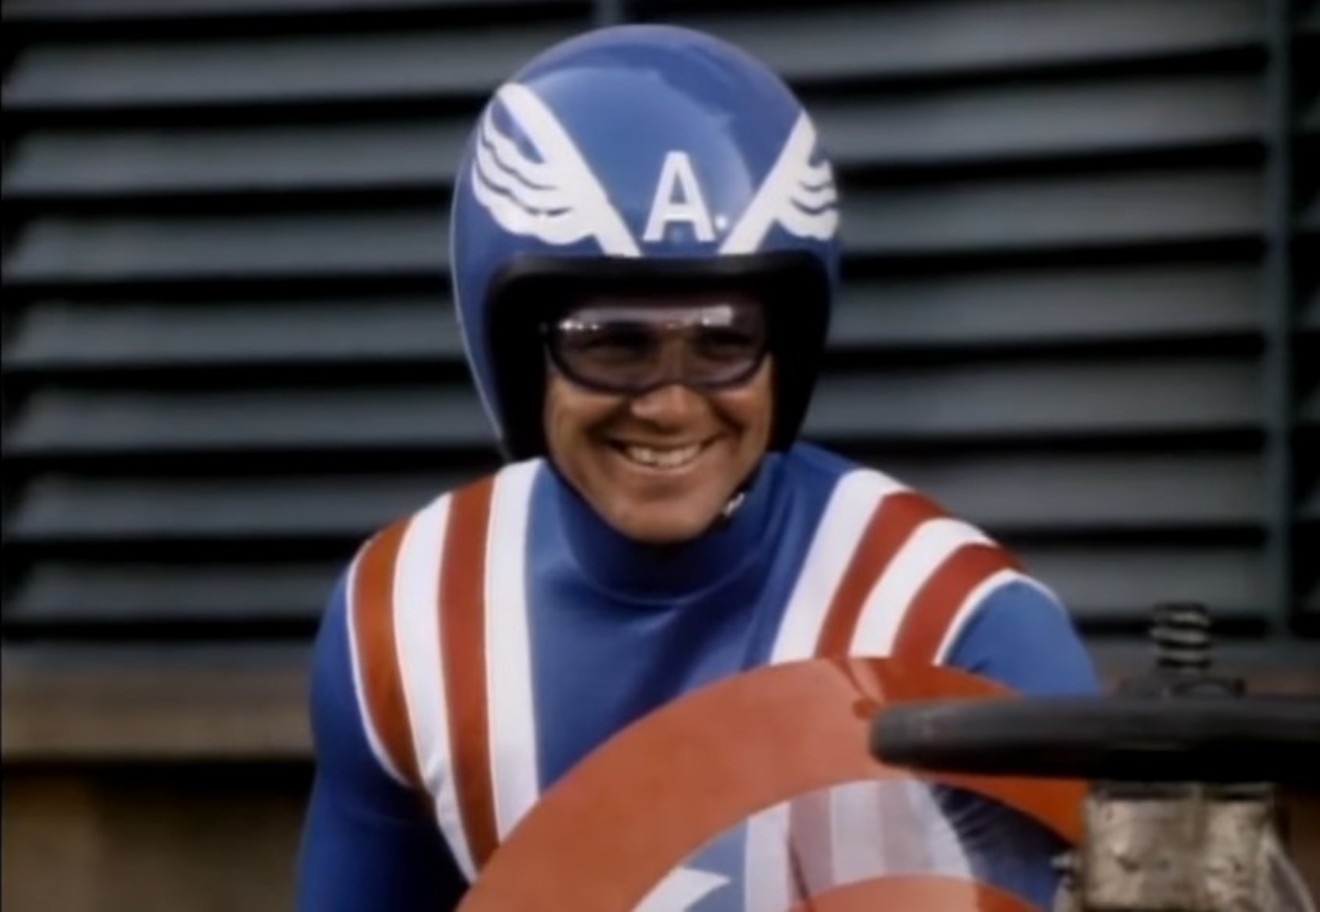 Reb Brown plays Captain America in a cheesy 1979 CBS adaptation of the Marvel Comics character.